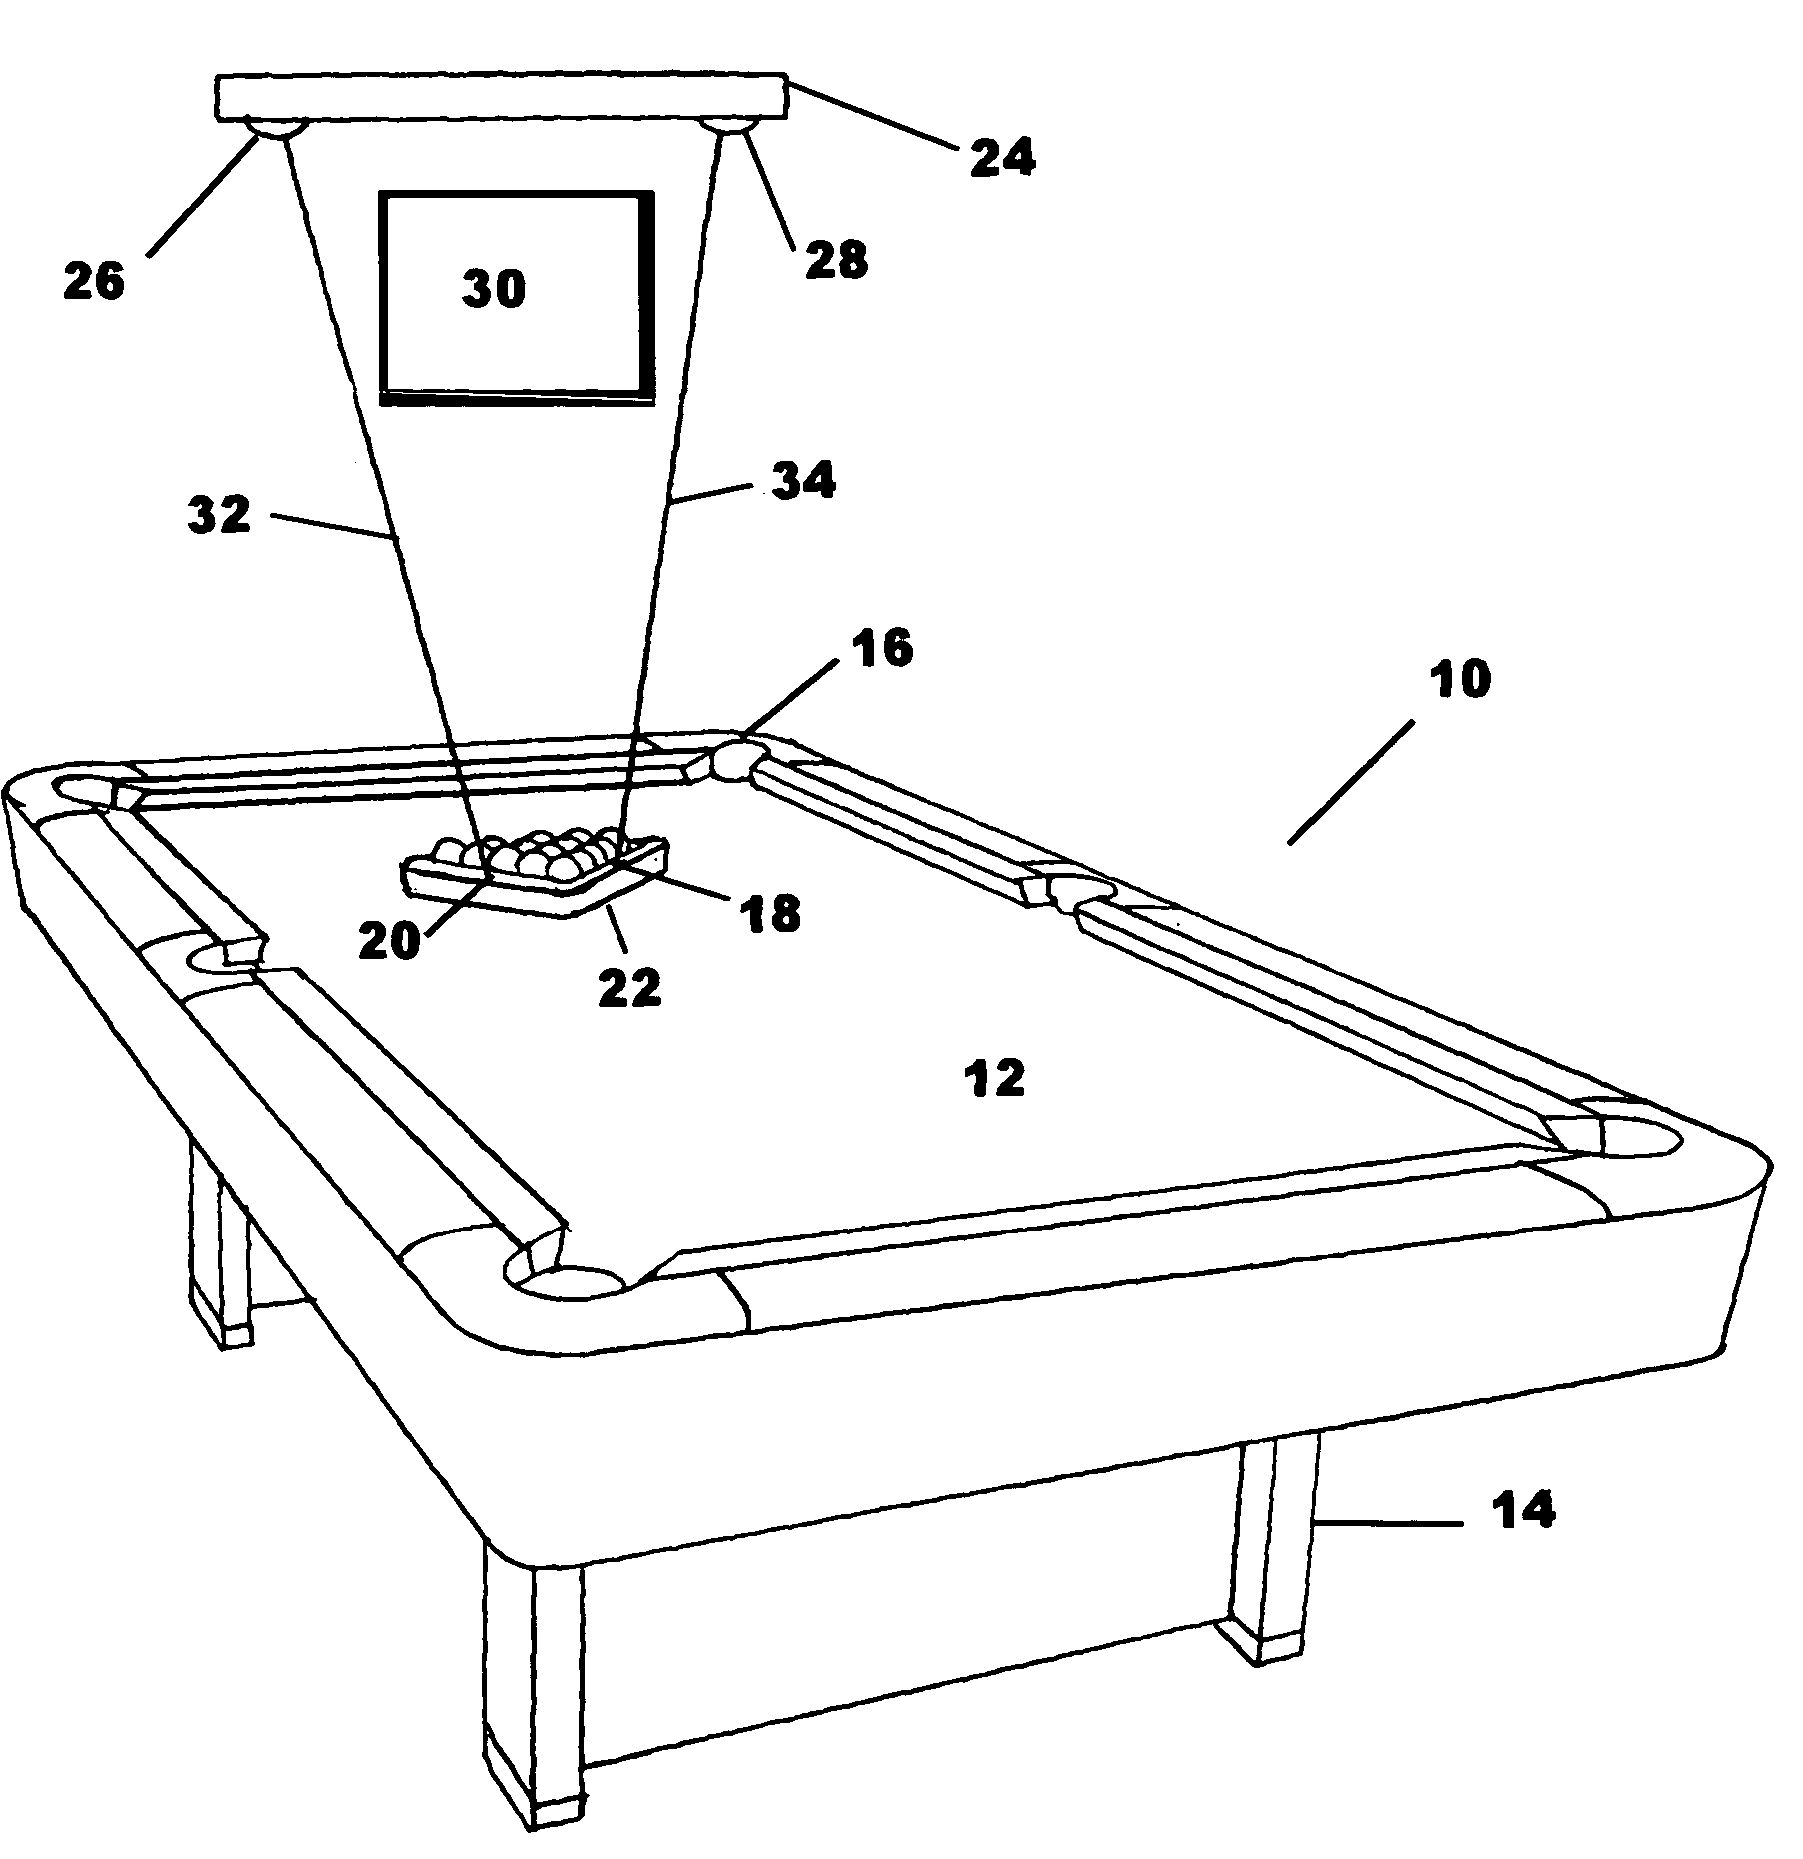 Method and apparatus for positioning a billiard game rack